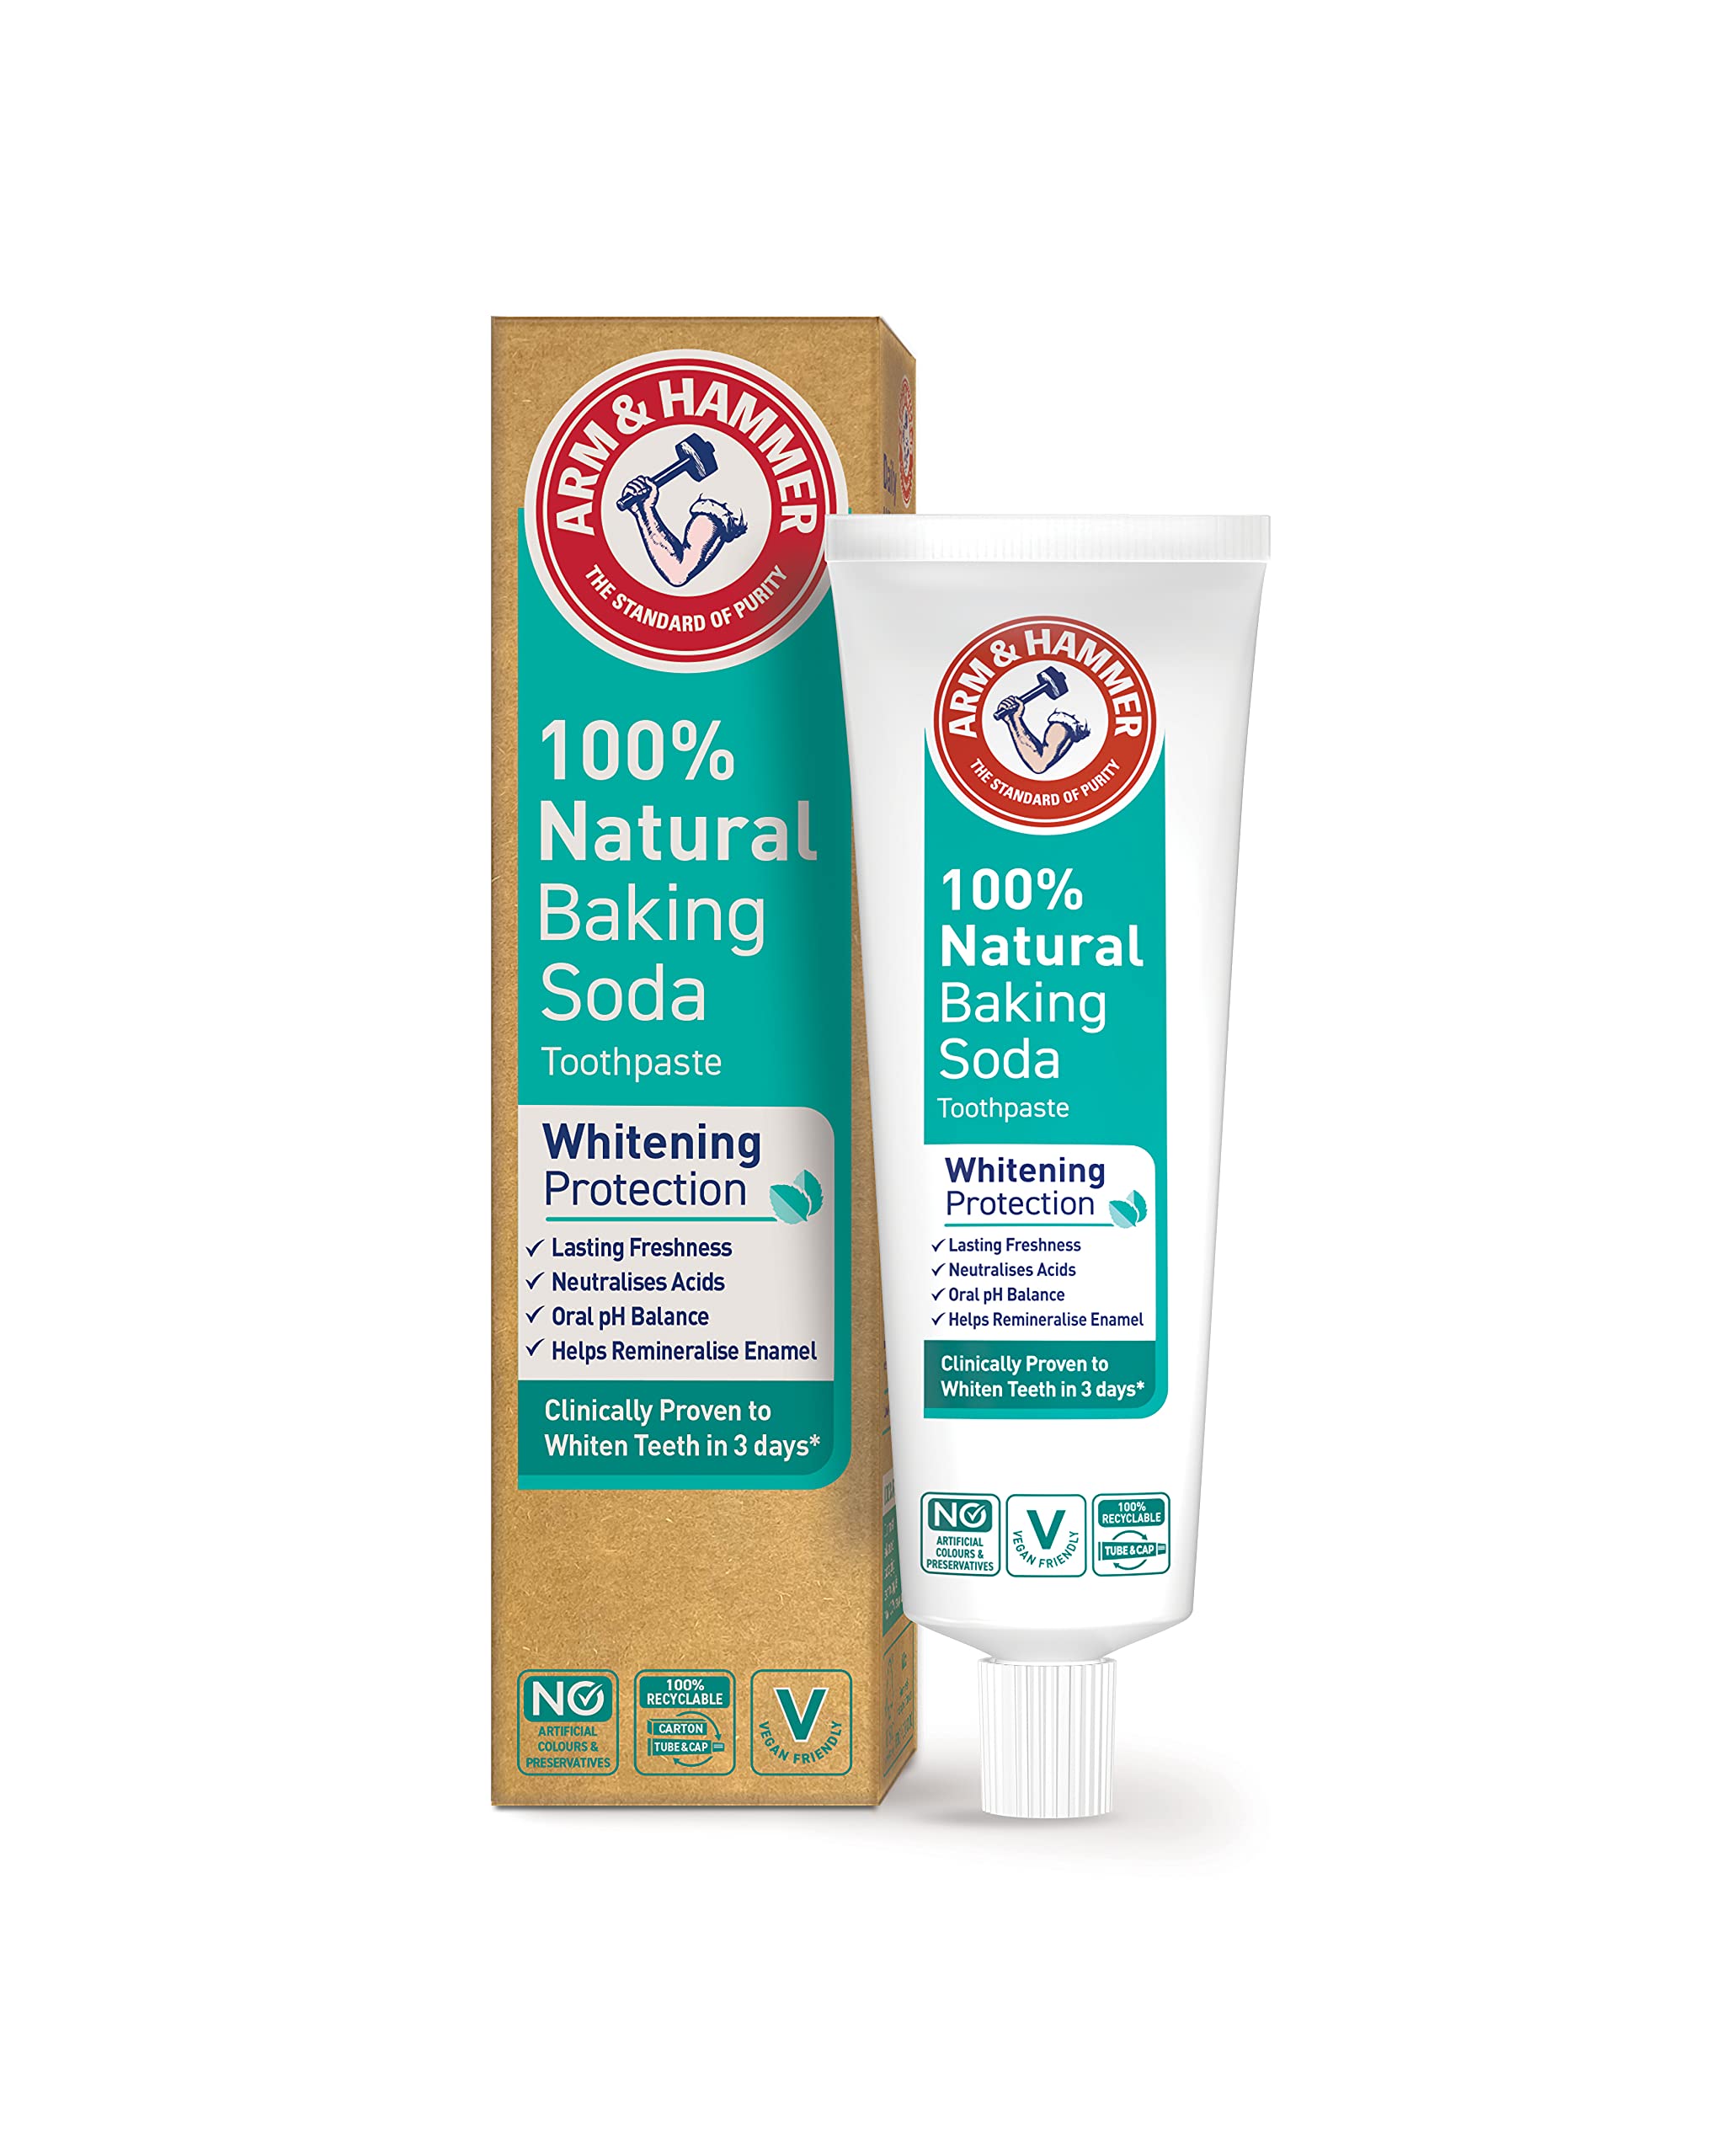 Arm & Hammer 100% Natural Baking Soda Whitening Protection Toothpaste